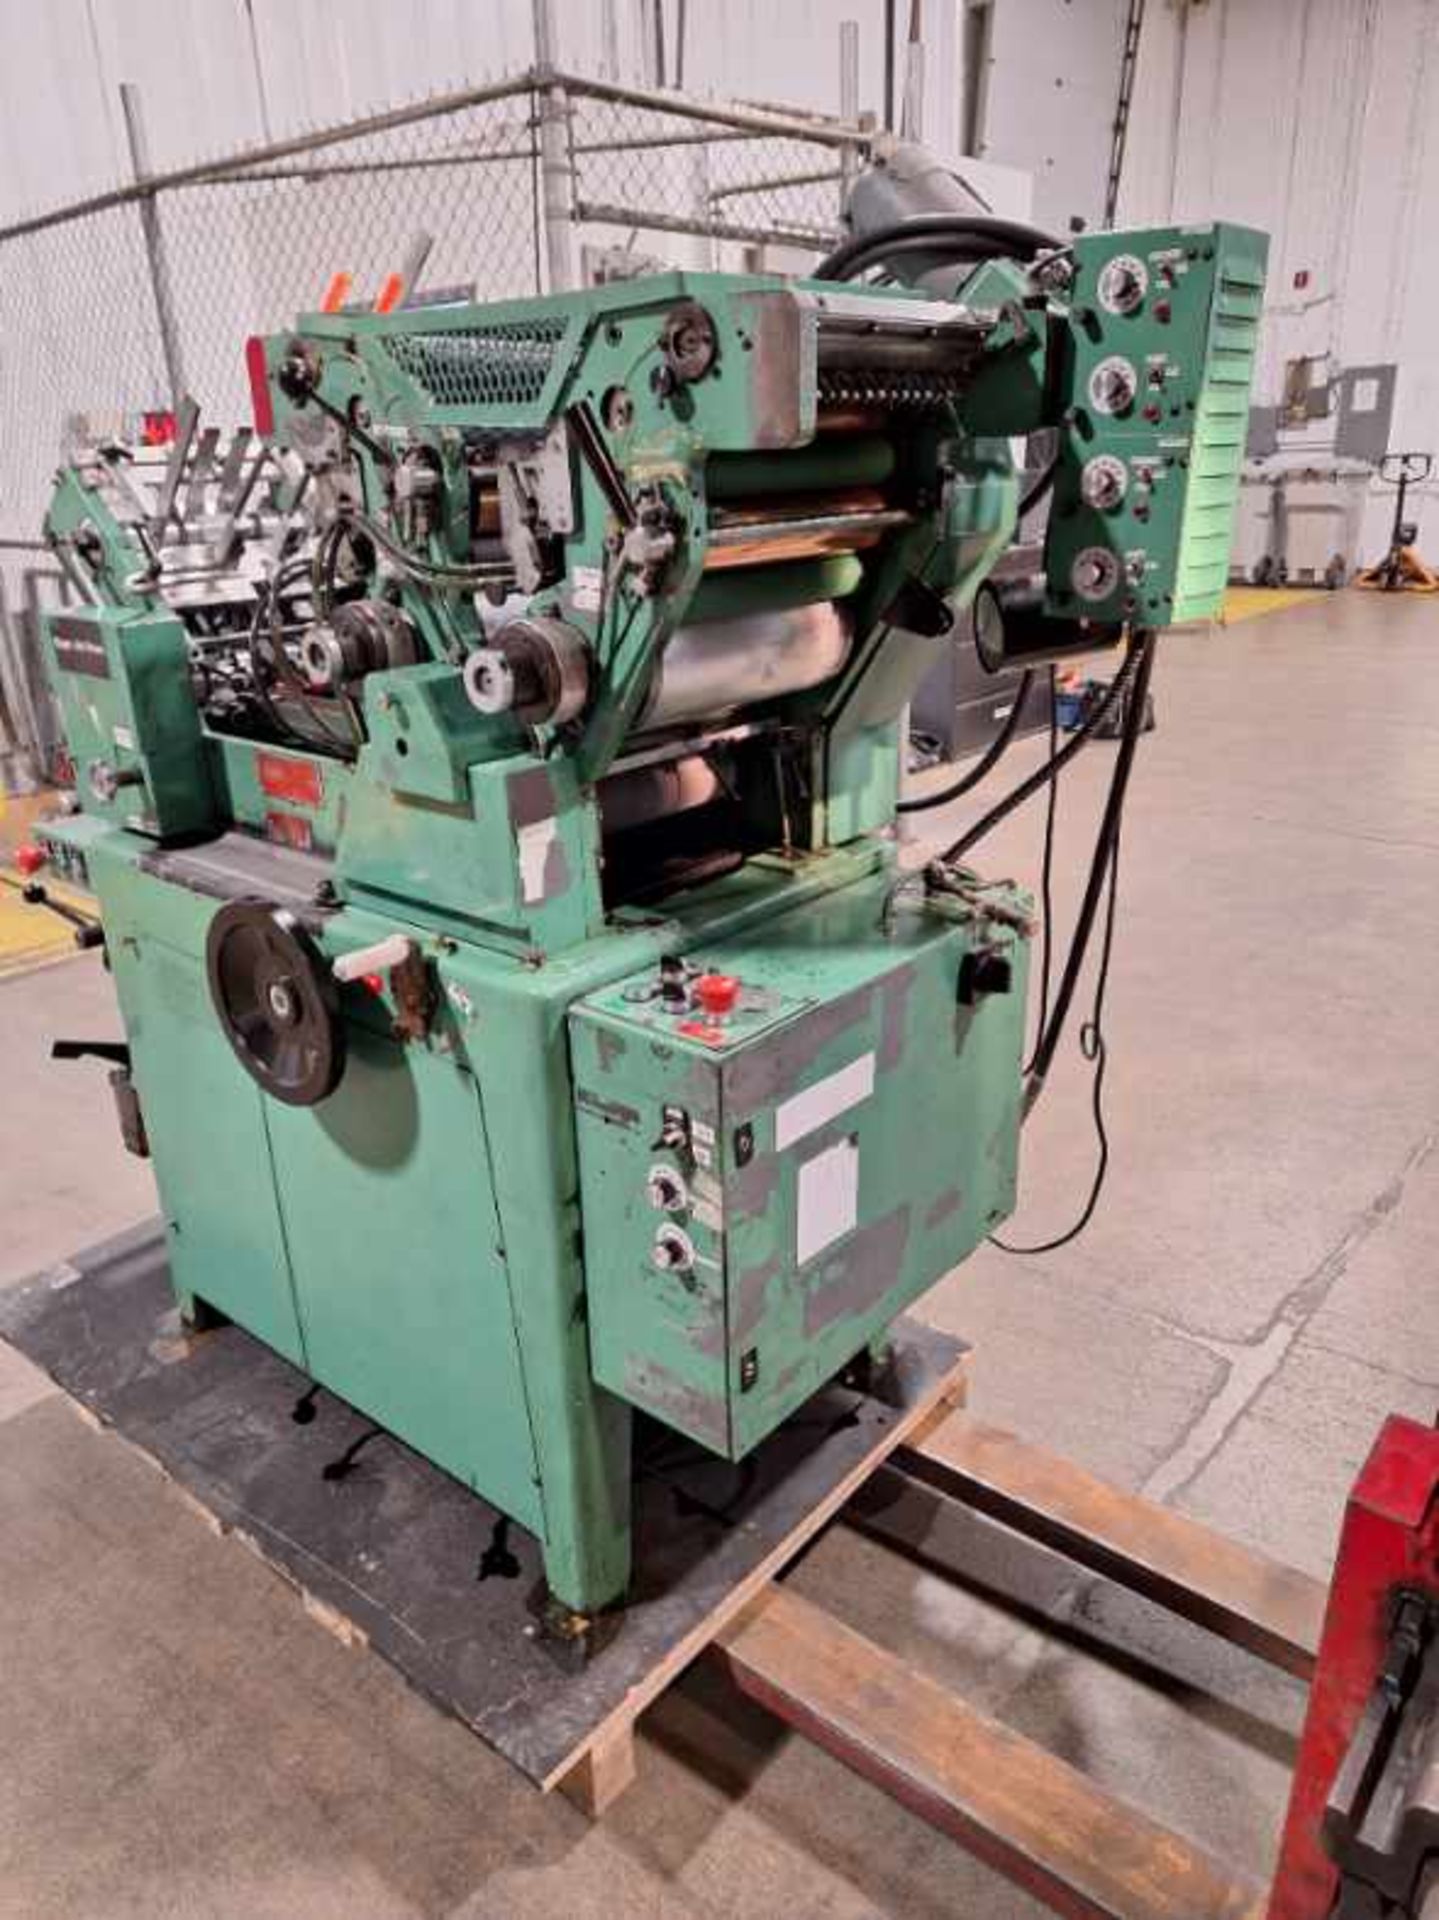 Halm 2 Color Jet Press. This lot is located in Binghamton, NY 13901 - Image 3 of 3